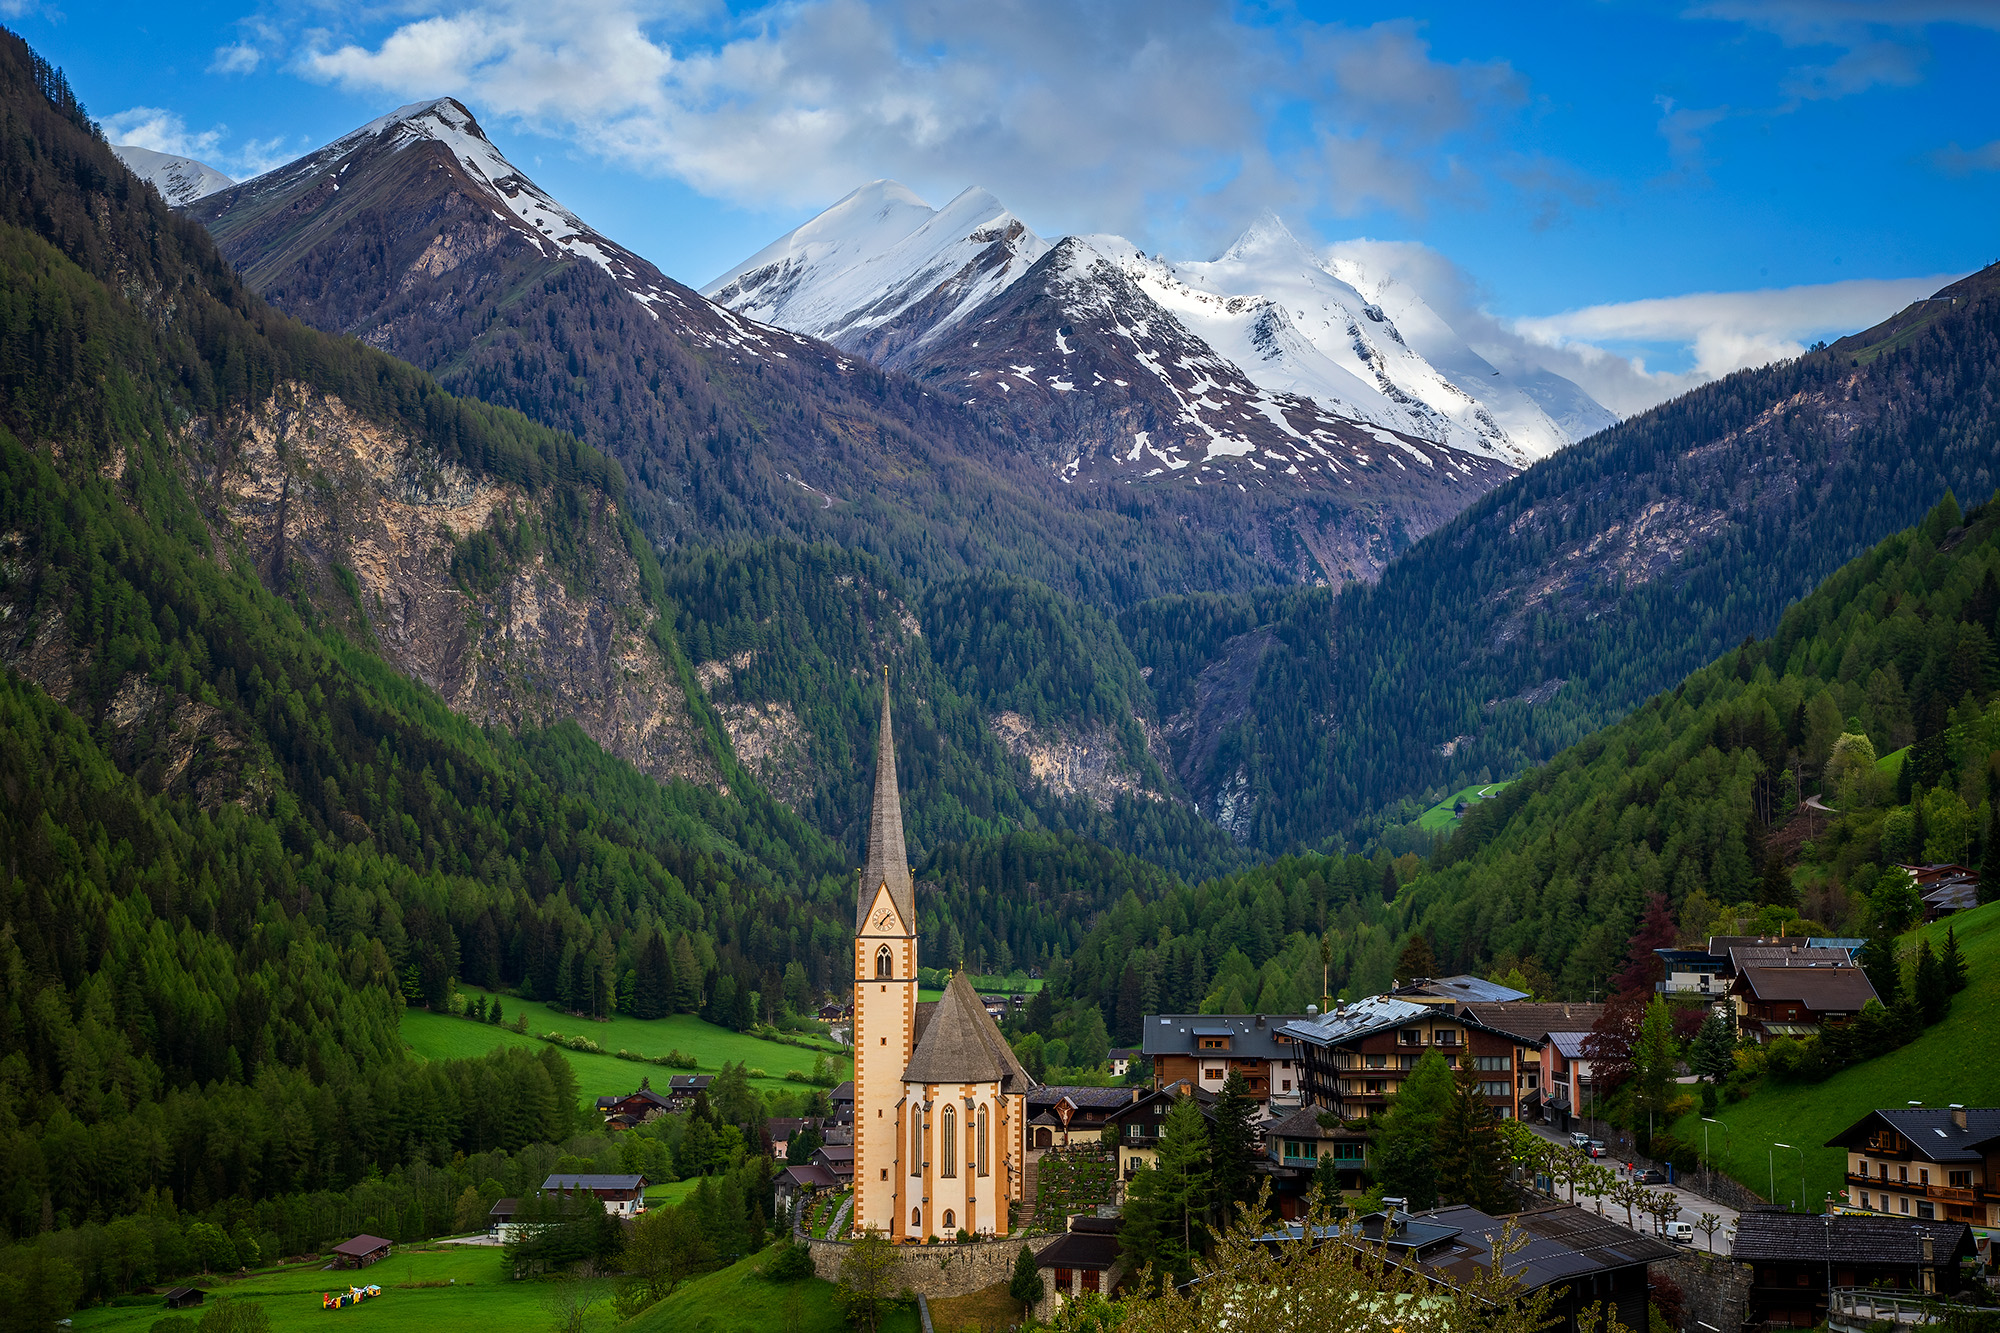 Upon crossing the Gornergrat Pass, we arrived in the enchanting town of Heiligenblut, Austria. There, we discovered a mesmerizing...